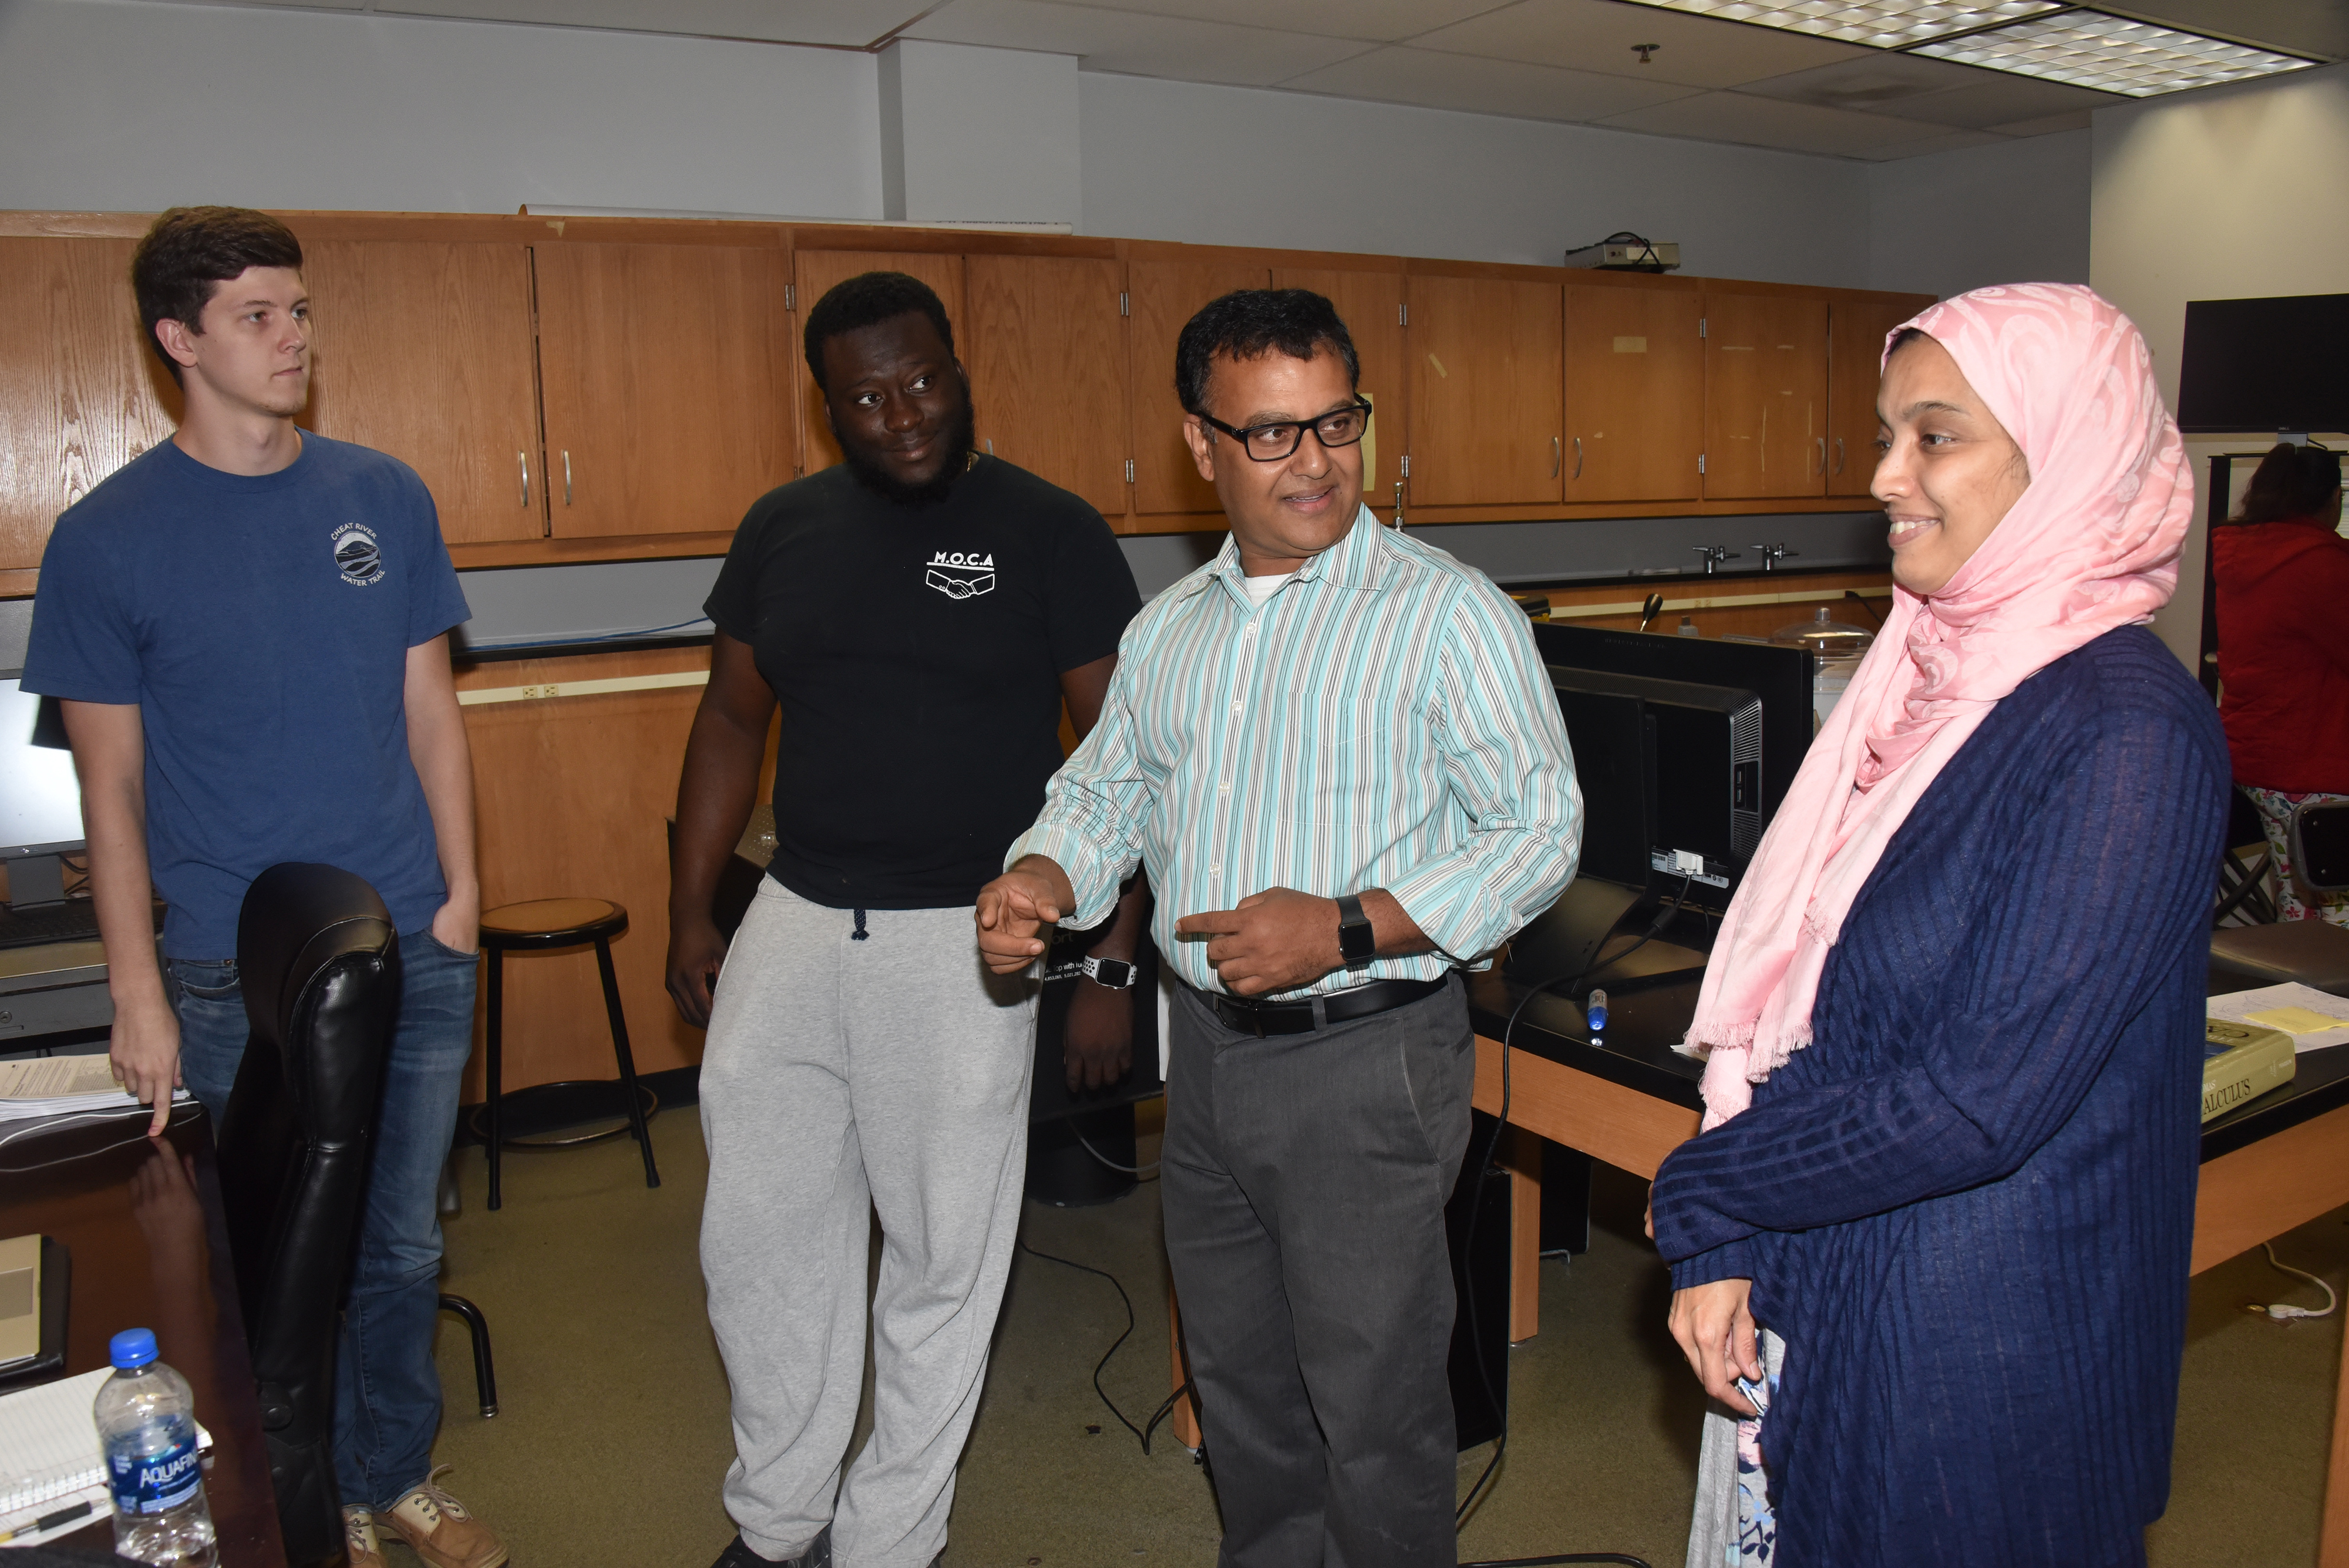 The DoD funded X-ray Diffraction System will not only be used for ongoing and future research project, but also it will be used an advanced technology that science students (like the ones Dr. Mukti Rana is chatting with here) can be exposed to and trained to use.